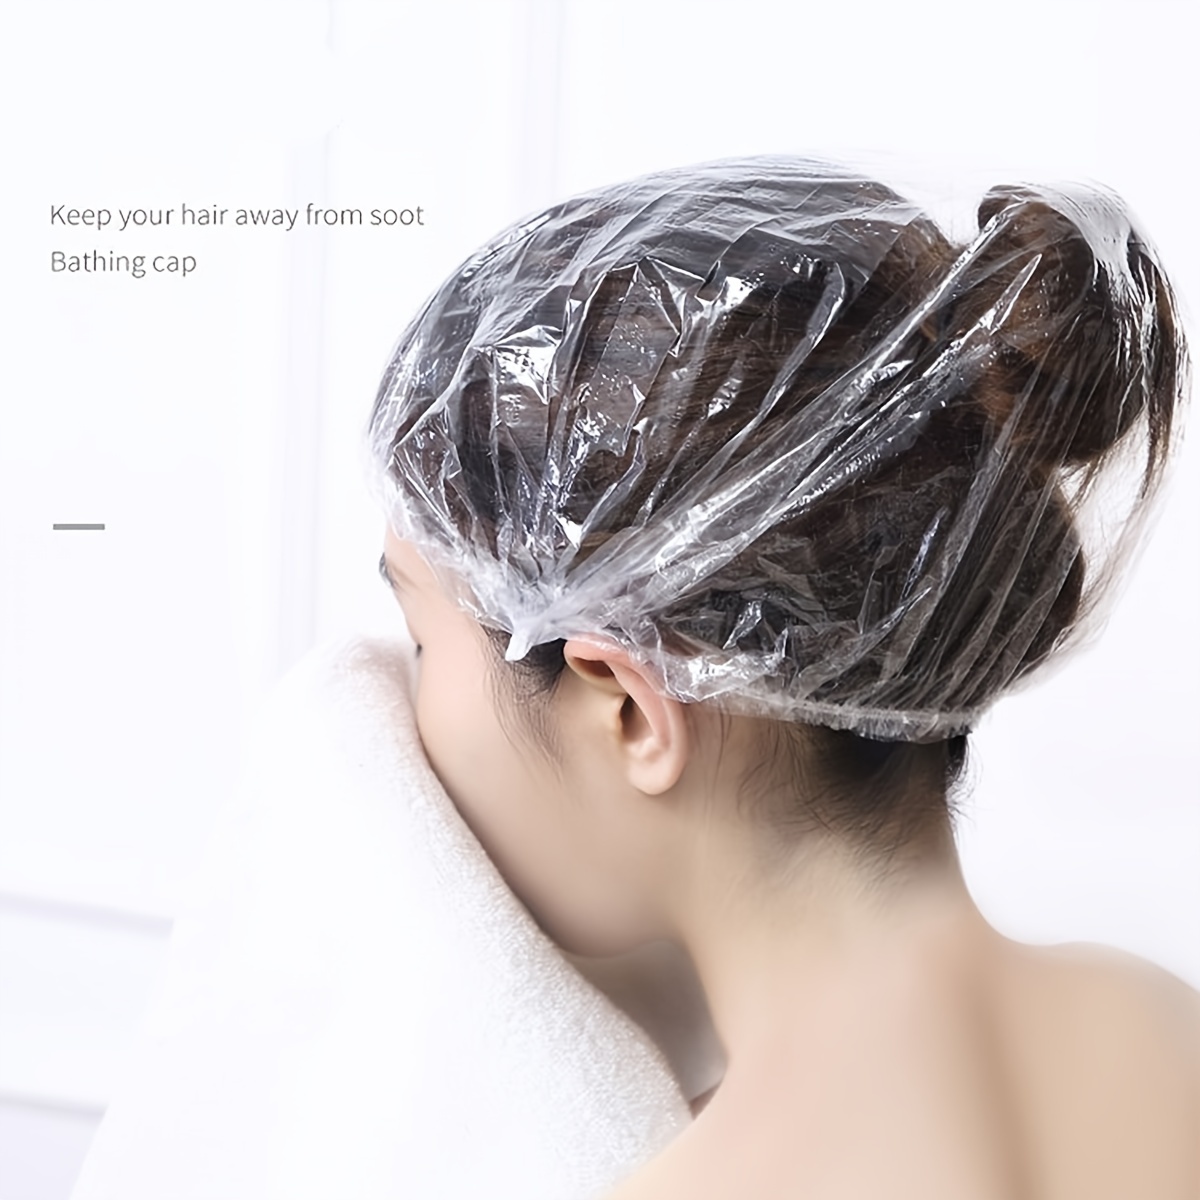 4 ways a good shower cap is a hair care essential - Laminated Cotton Shop